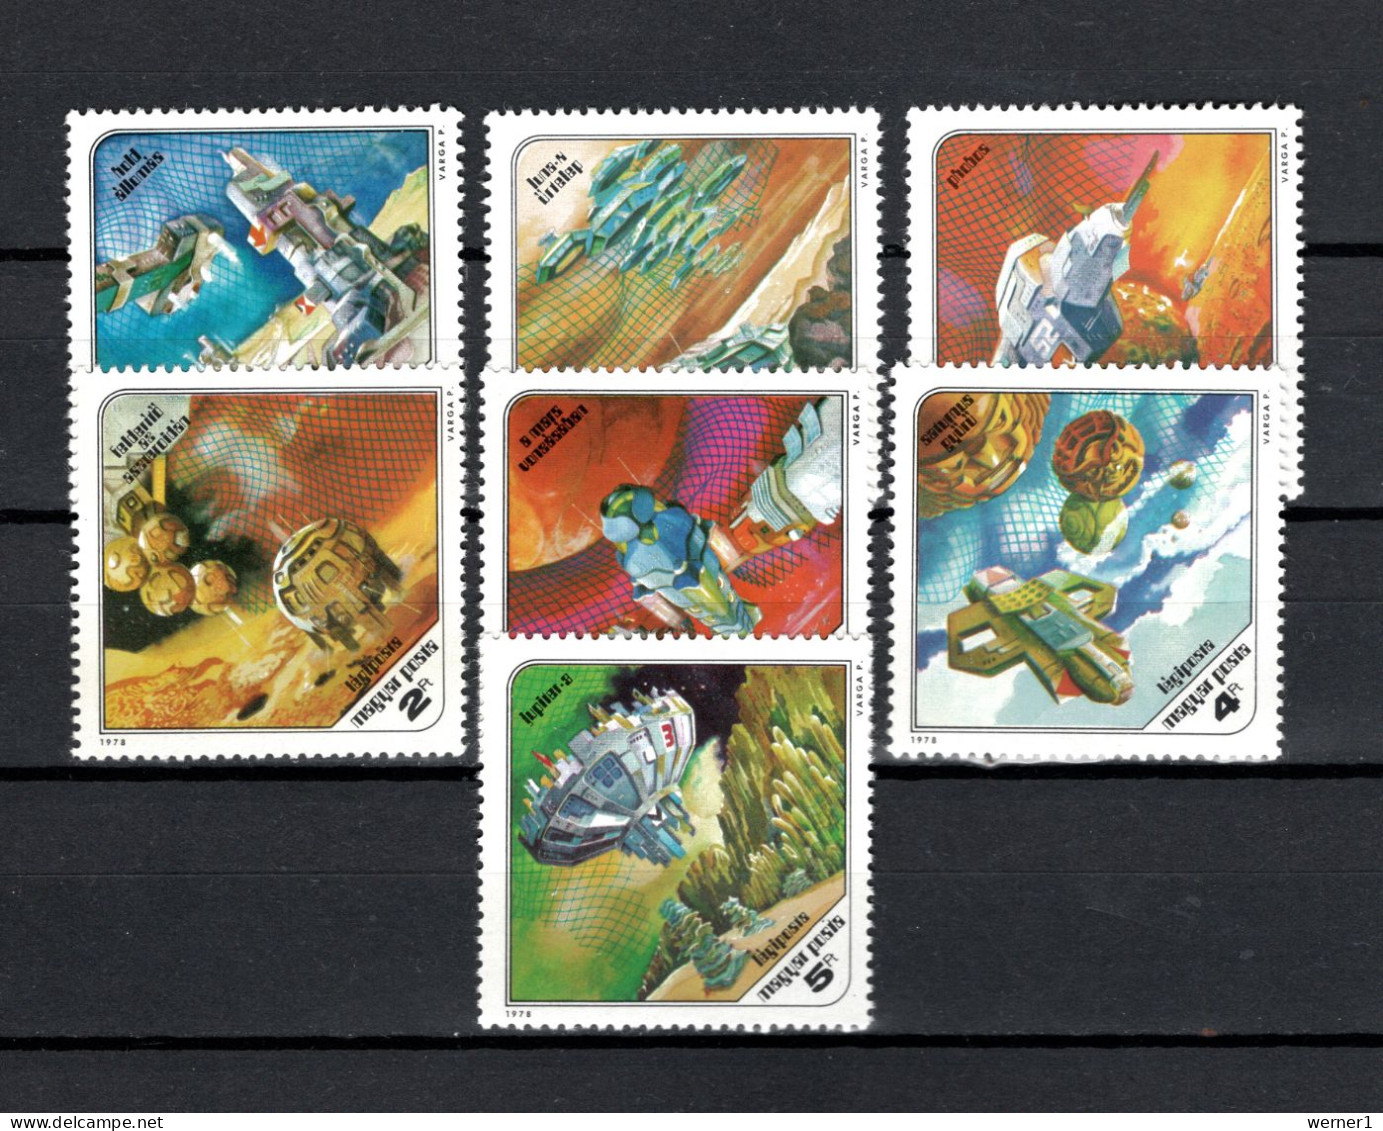 Hungary 1978 Space Research In The Future Set Of 7 MNH - Europe